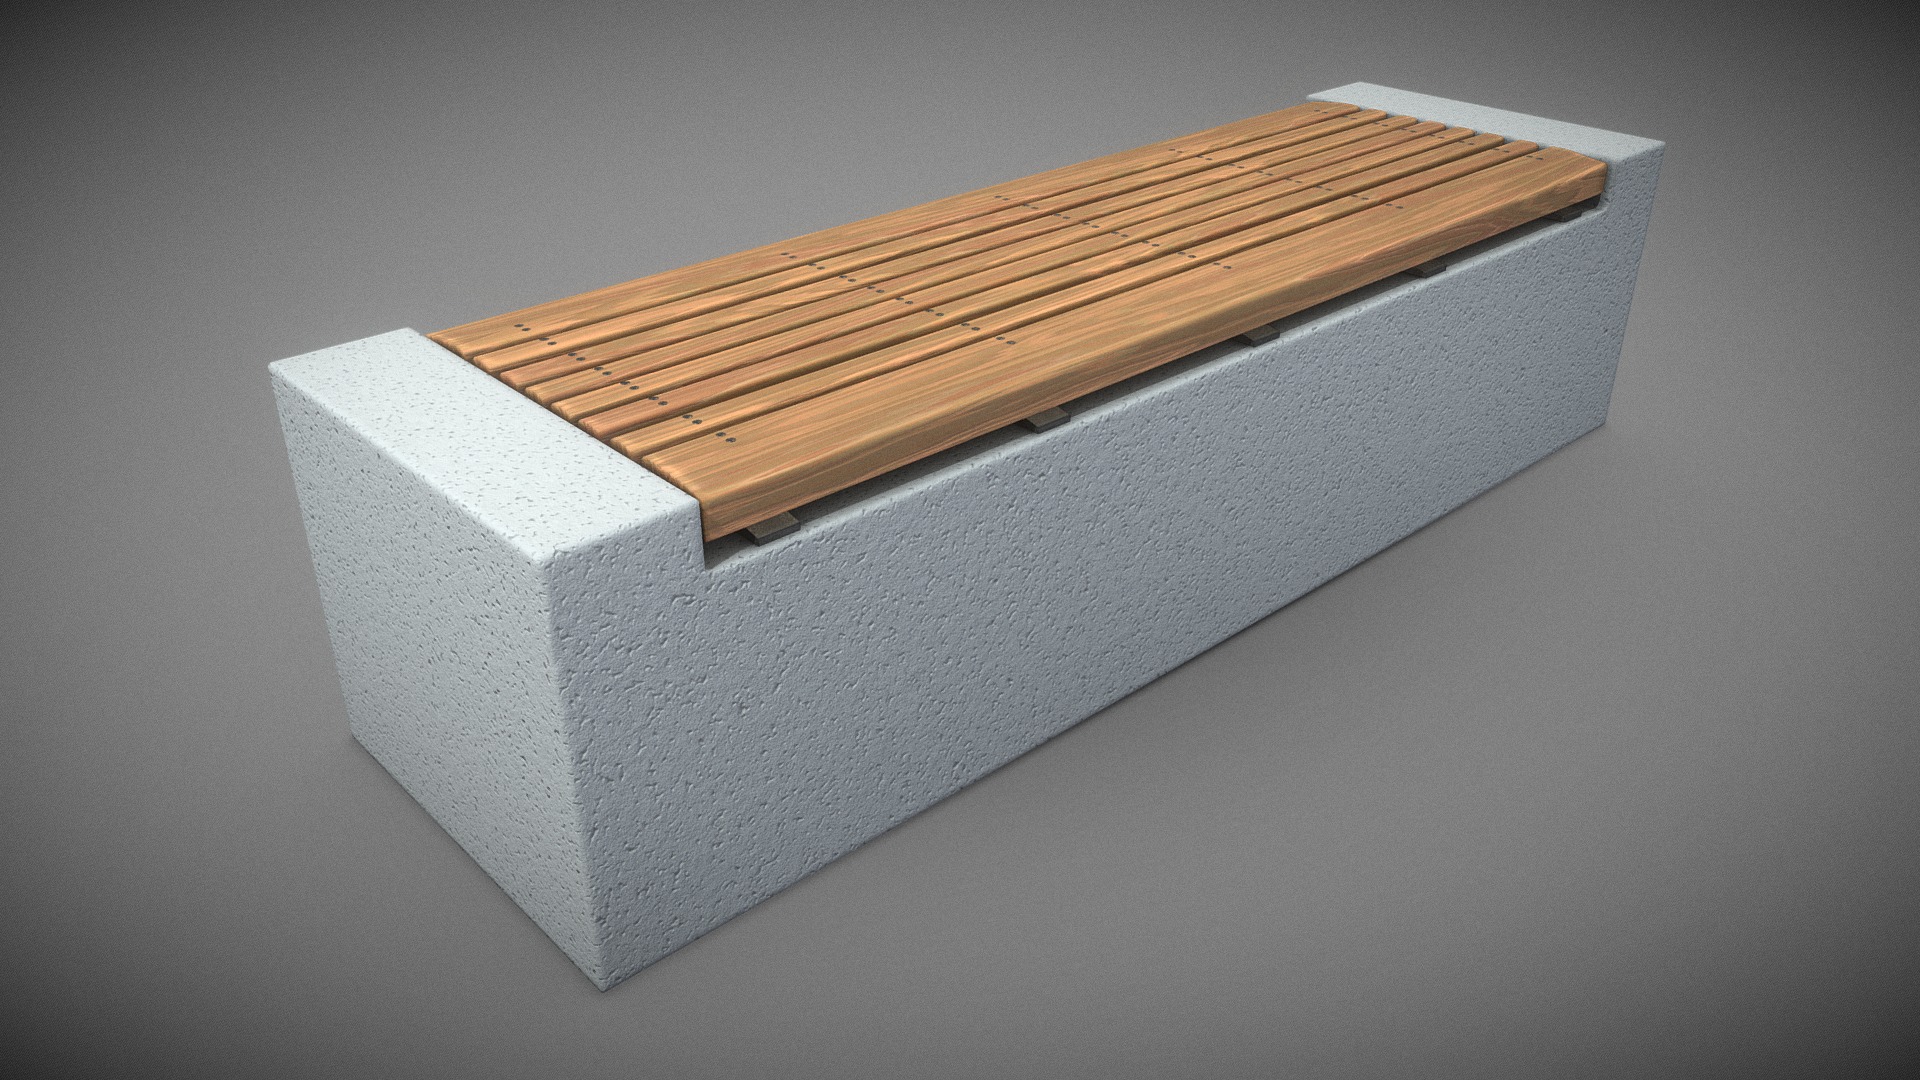 3D model Bench [6] Wood on Concrete Block 2 - This is a 3D model of the Bench [6] Wood on Concrete Block 2. The 3D model is about a wooden box on a white surface.